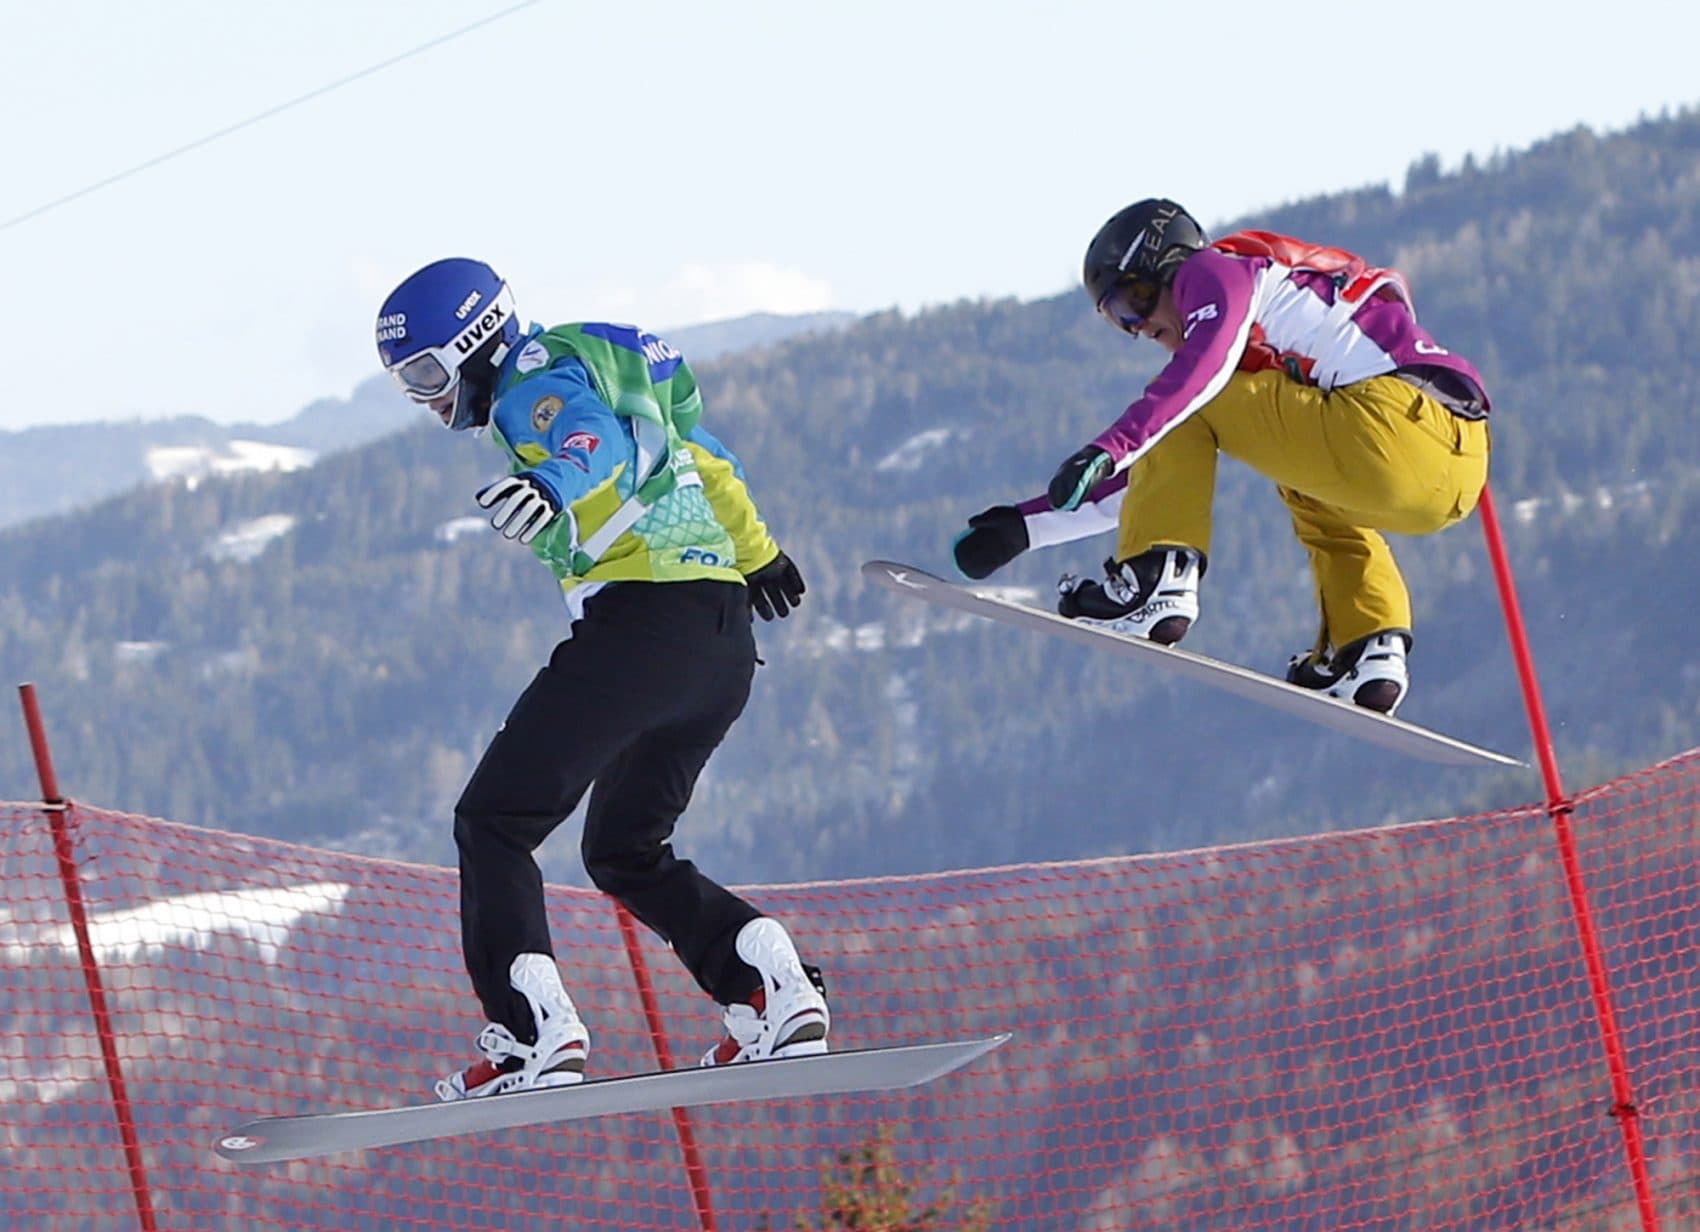 Lindsey Jacobellis, right, from the U.S. competes to win the snowboard cross event at the Freestyle Ski and Snowboard World Championships in Kreischberg, Austria, Friday, Jan. 16, 2015. (Darko Bandic/AP)